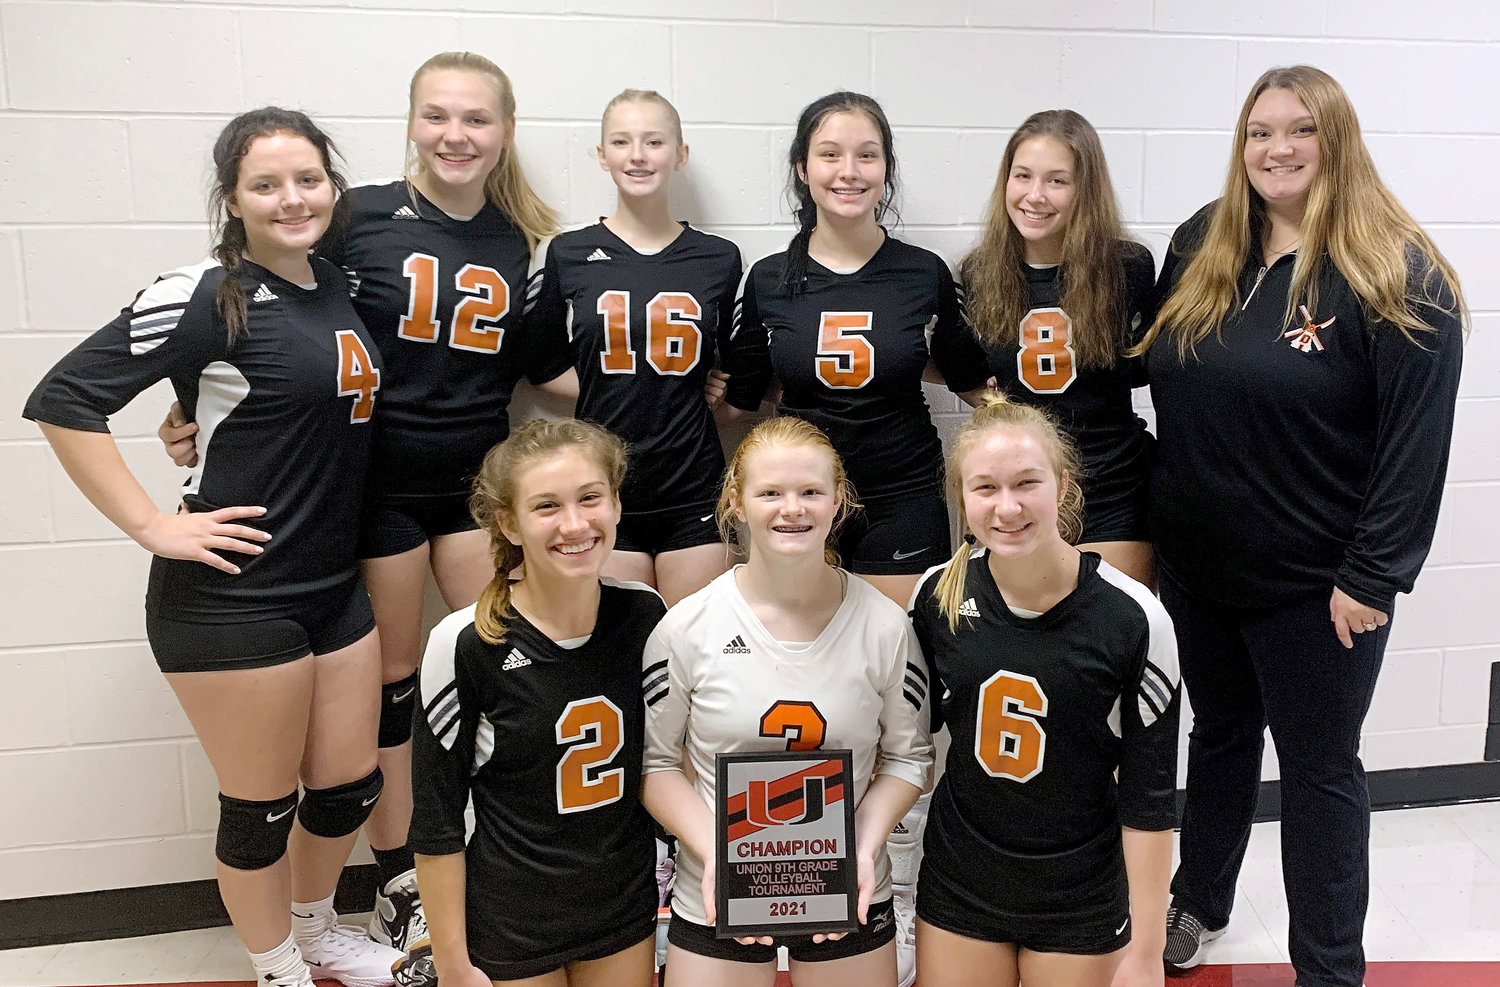 Owensville Dutchgirl freshmen volleyball players (above) gather for a team picture celebrating their tournament championship over the weekend in Union following their victories over Pacific, Hermann, Union, Waynesville and Capital City during the round-robin event. Team members (above, in front, from left) with the championship plaque from Union include Ruvia Nowack, Elizabeth Adams and Camryn Caldwell; and in back, Kaydin Carr, Callie Koelling, Cameron Nowack, Ellie Thompson, Allie Kuebler and Taylor Payne (coach).